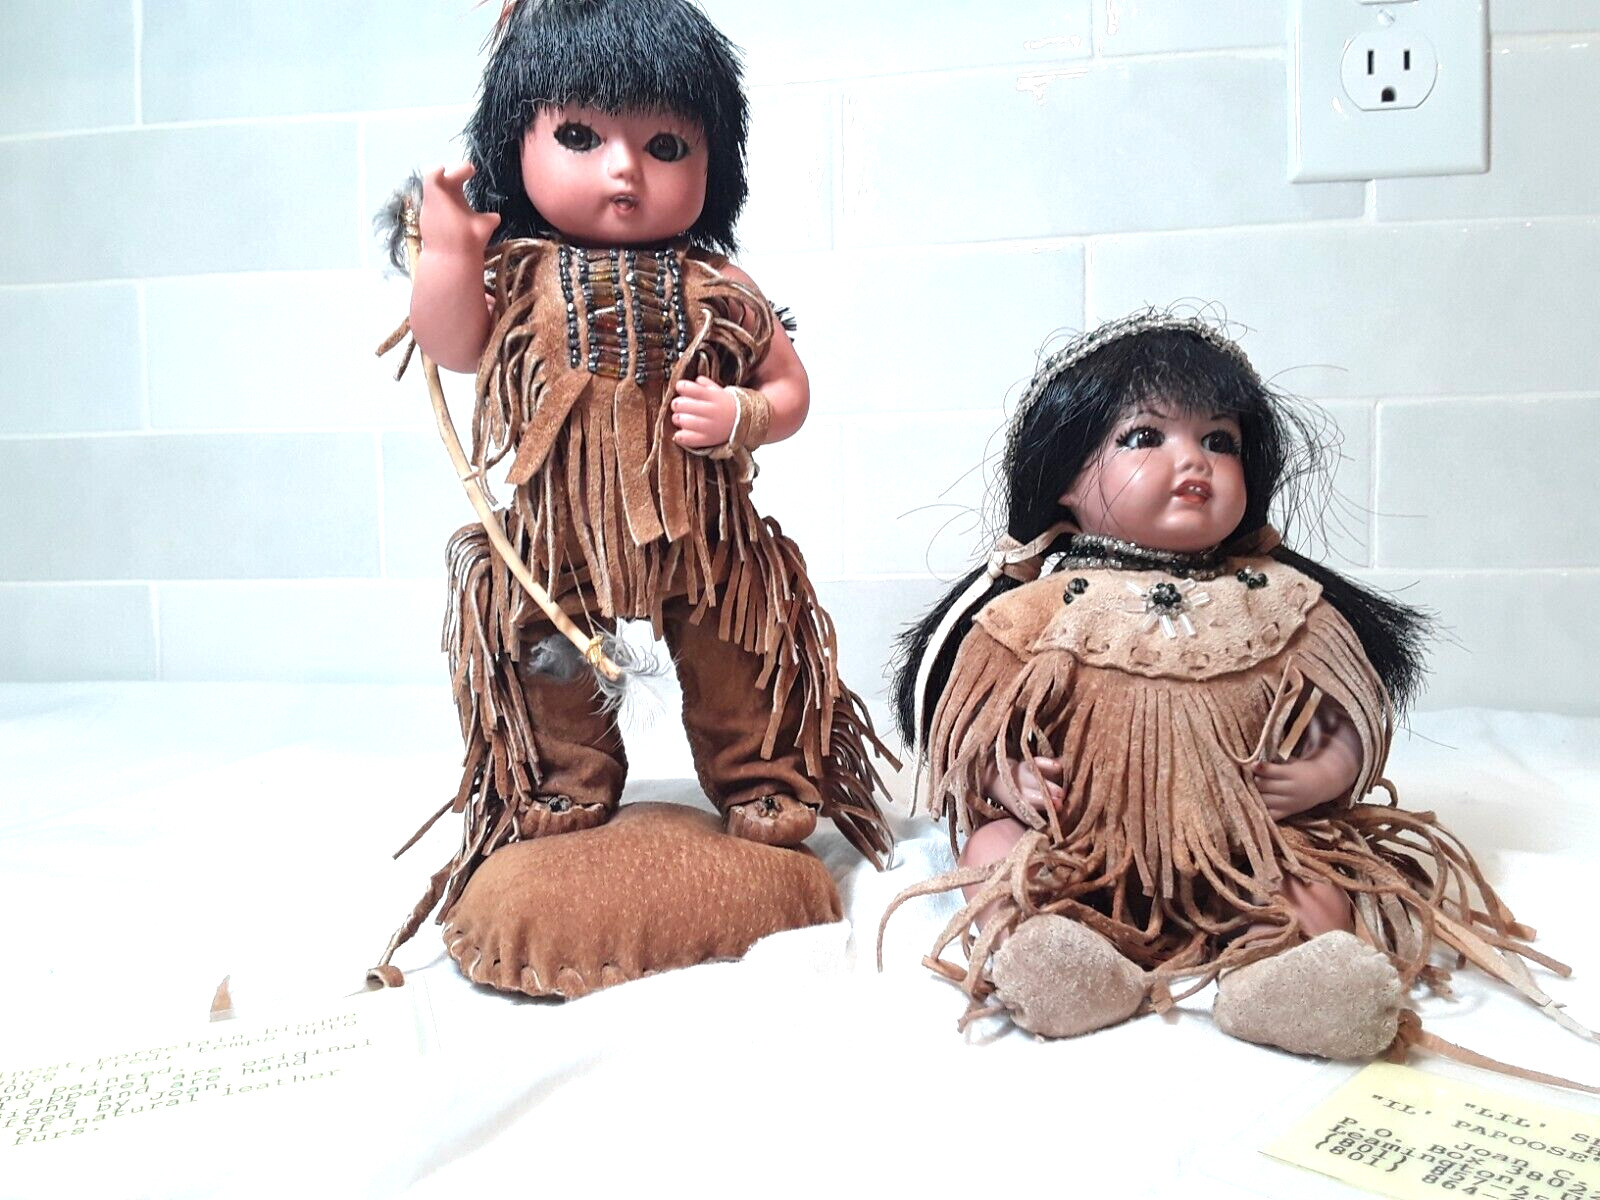 Lil Spotted Wing and Lil Big Brave Native American hand crafted Porcelain dolls